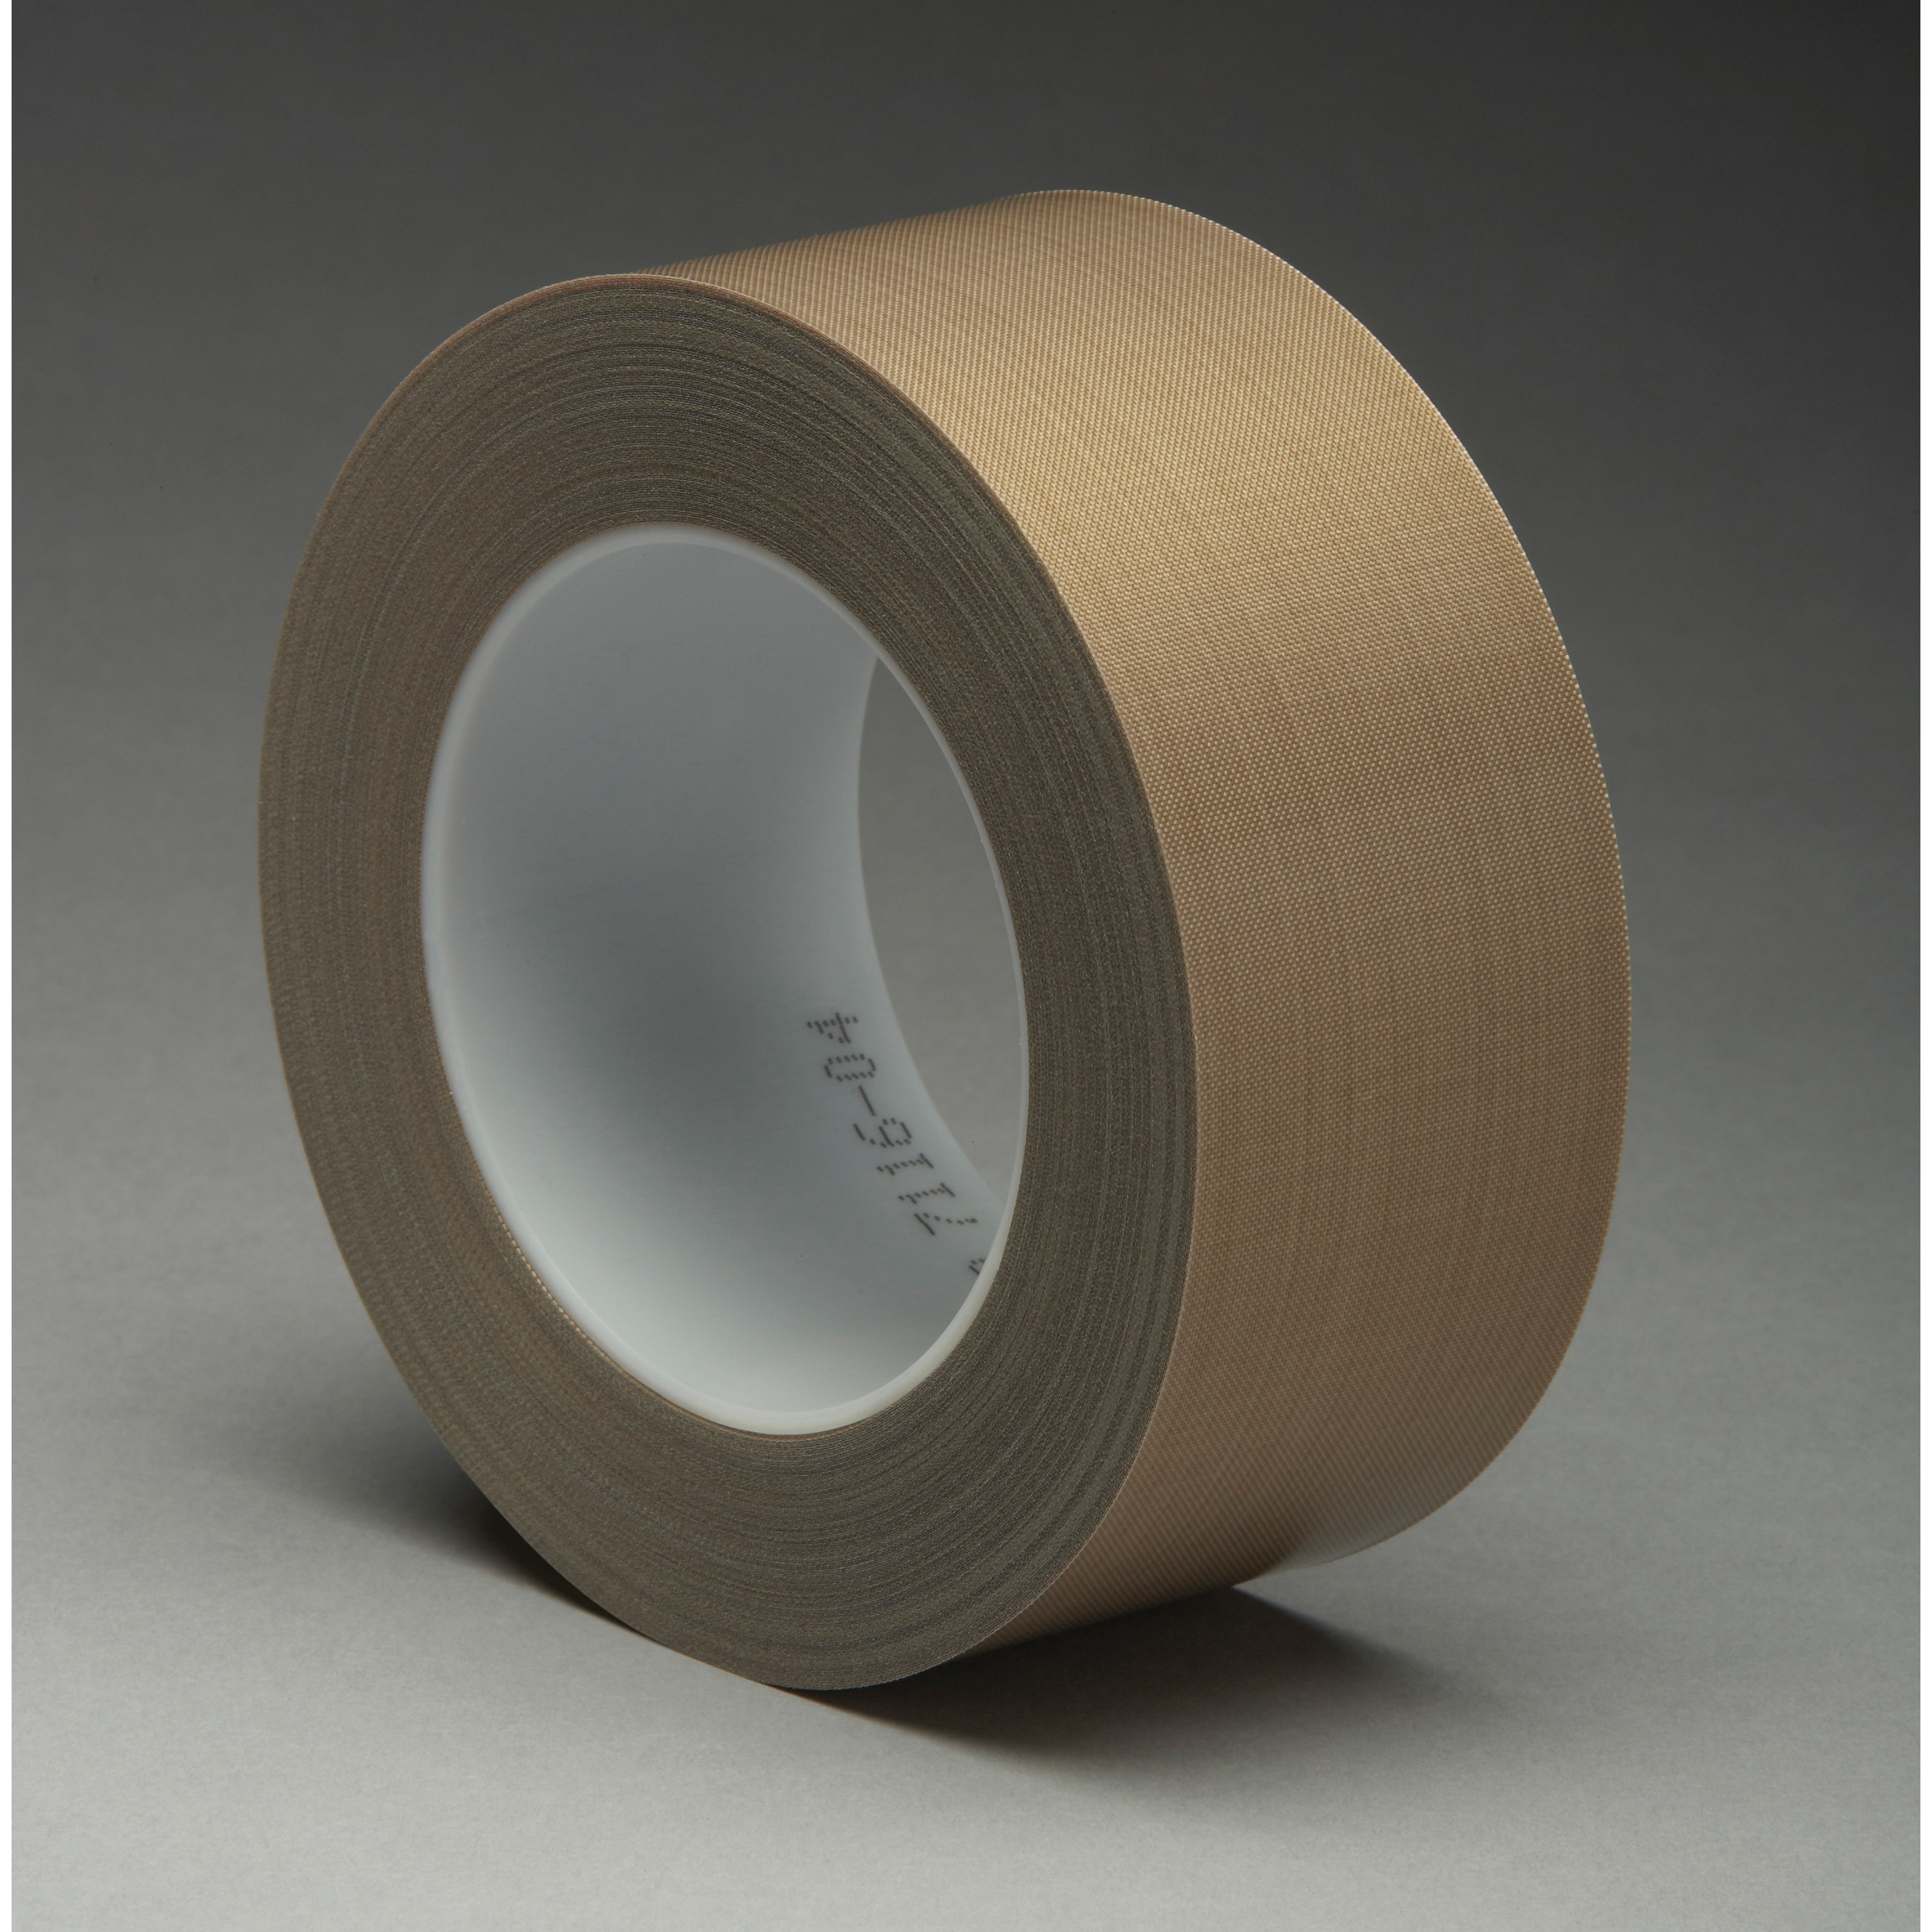 3M™ 021200-16158 Pressure Sensitive Glass Cloth Tape, 36 yd L x 1/2 in W, 8.2 mil THK, Silicon Adhesive, Woven Glass Cloth Impregnated with PTFE Backing, Brown